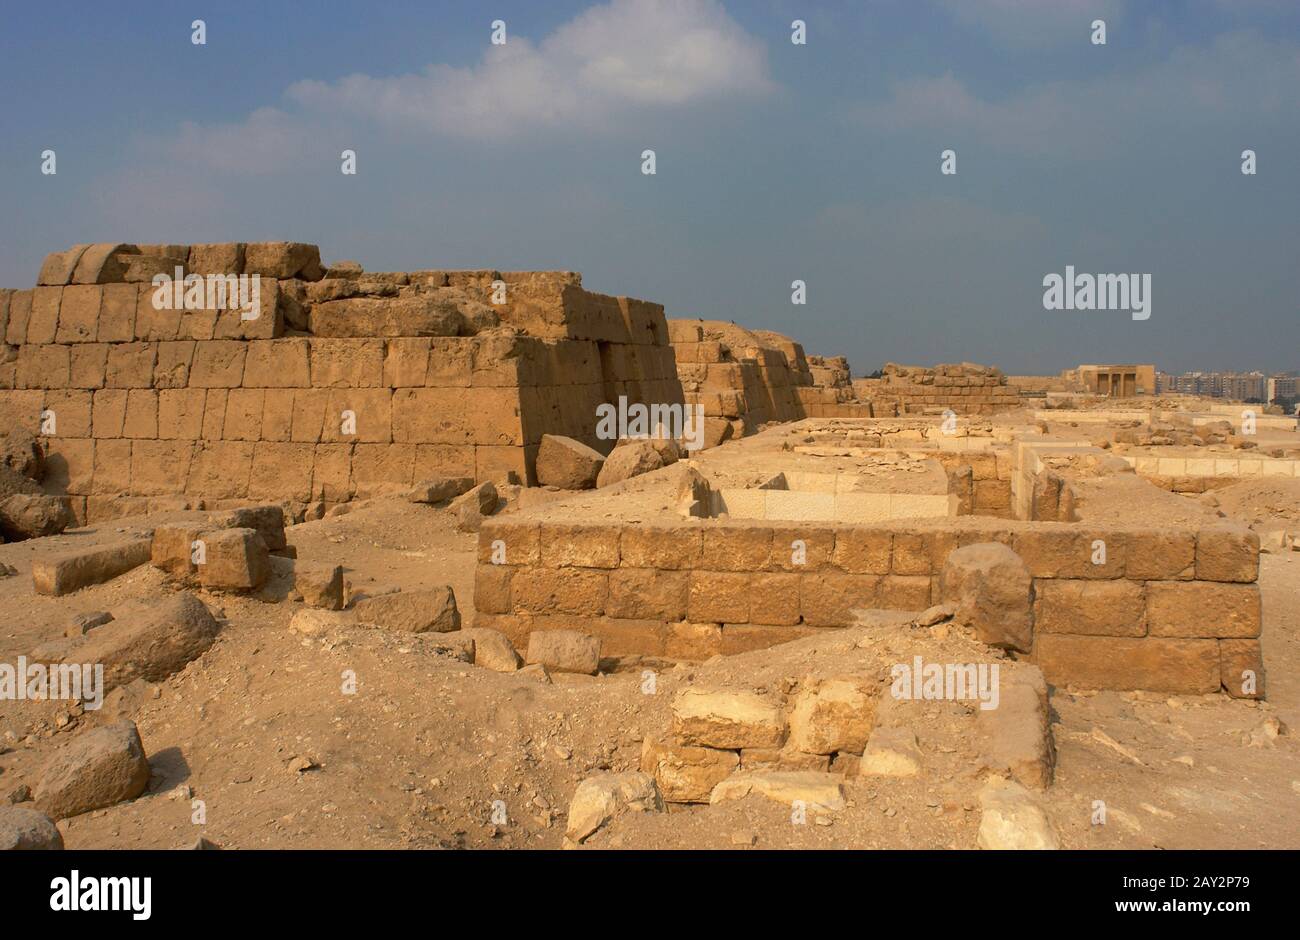 Egypt. Old Kingdom. 4th or 5th Dynasty. 24th-26th century BC. Ruins of a Mastaba, type of tomb in the form of a flat-roofed, rectangular. Giza pyramid complex. Stock Photo